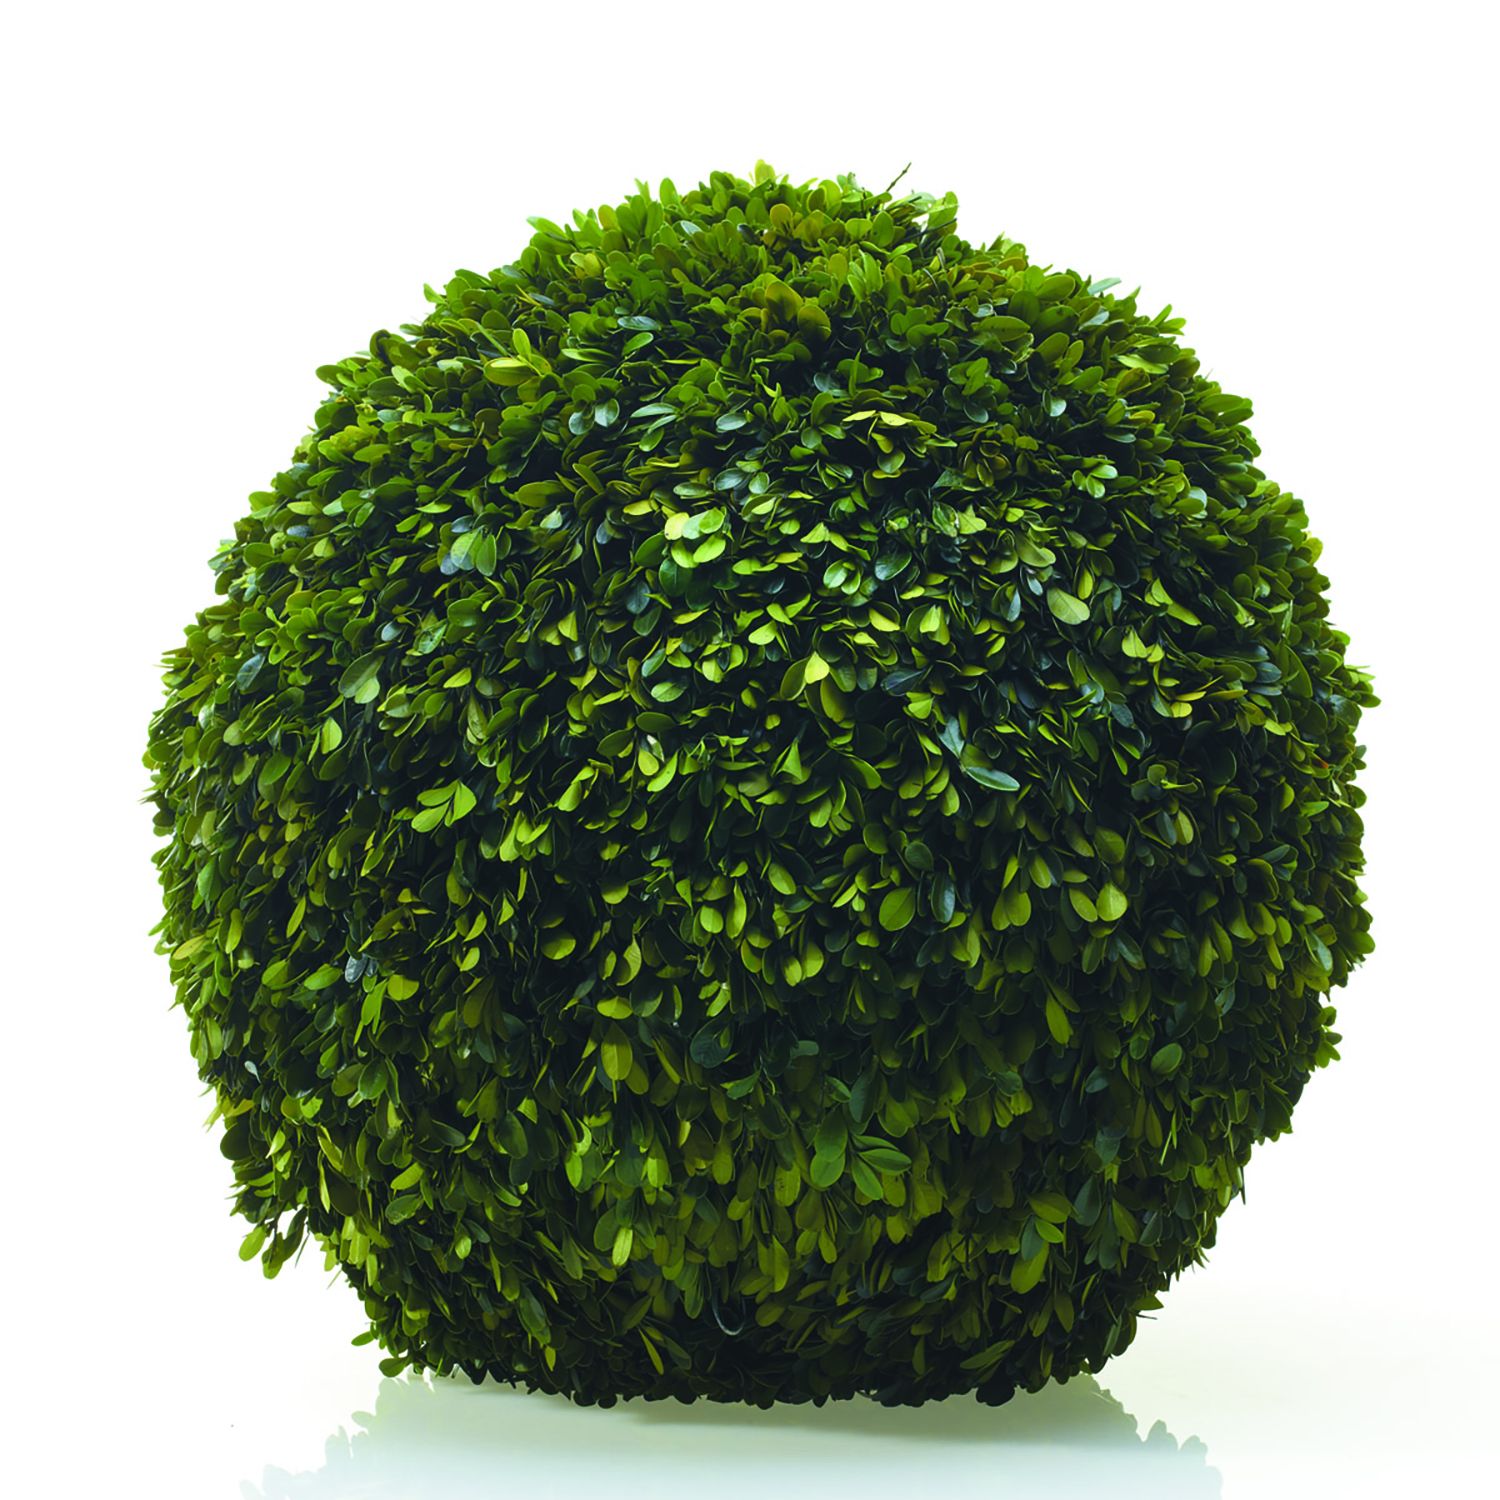 A masterful artist has sculpted a Preserved Boxwood Sphere from real English boxwoods, creating an impeccable work of art. It stands out vividly against the pristine white background. (Brand Name: Accent Decor)